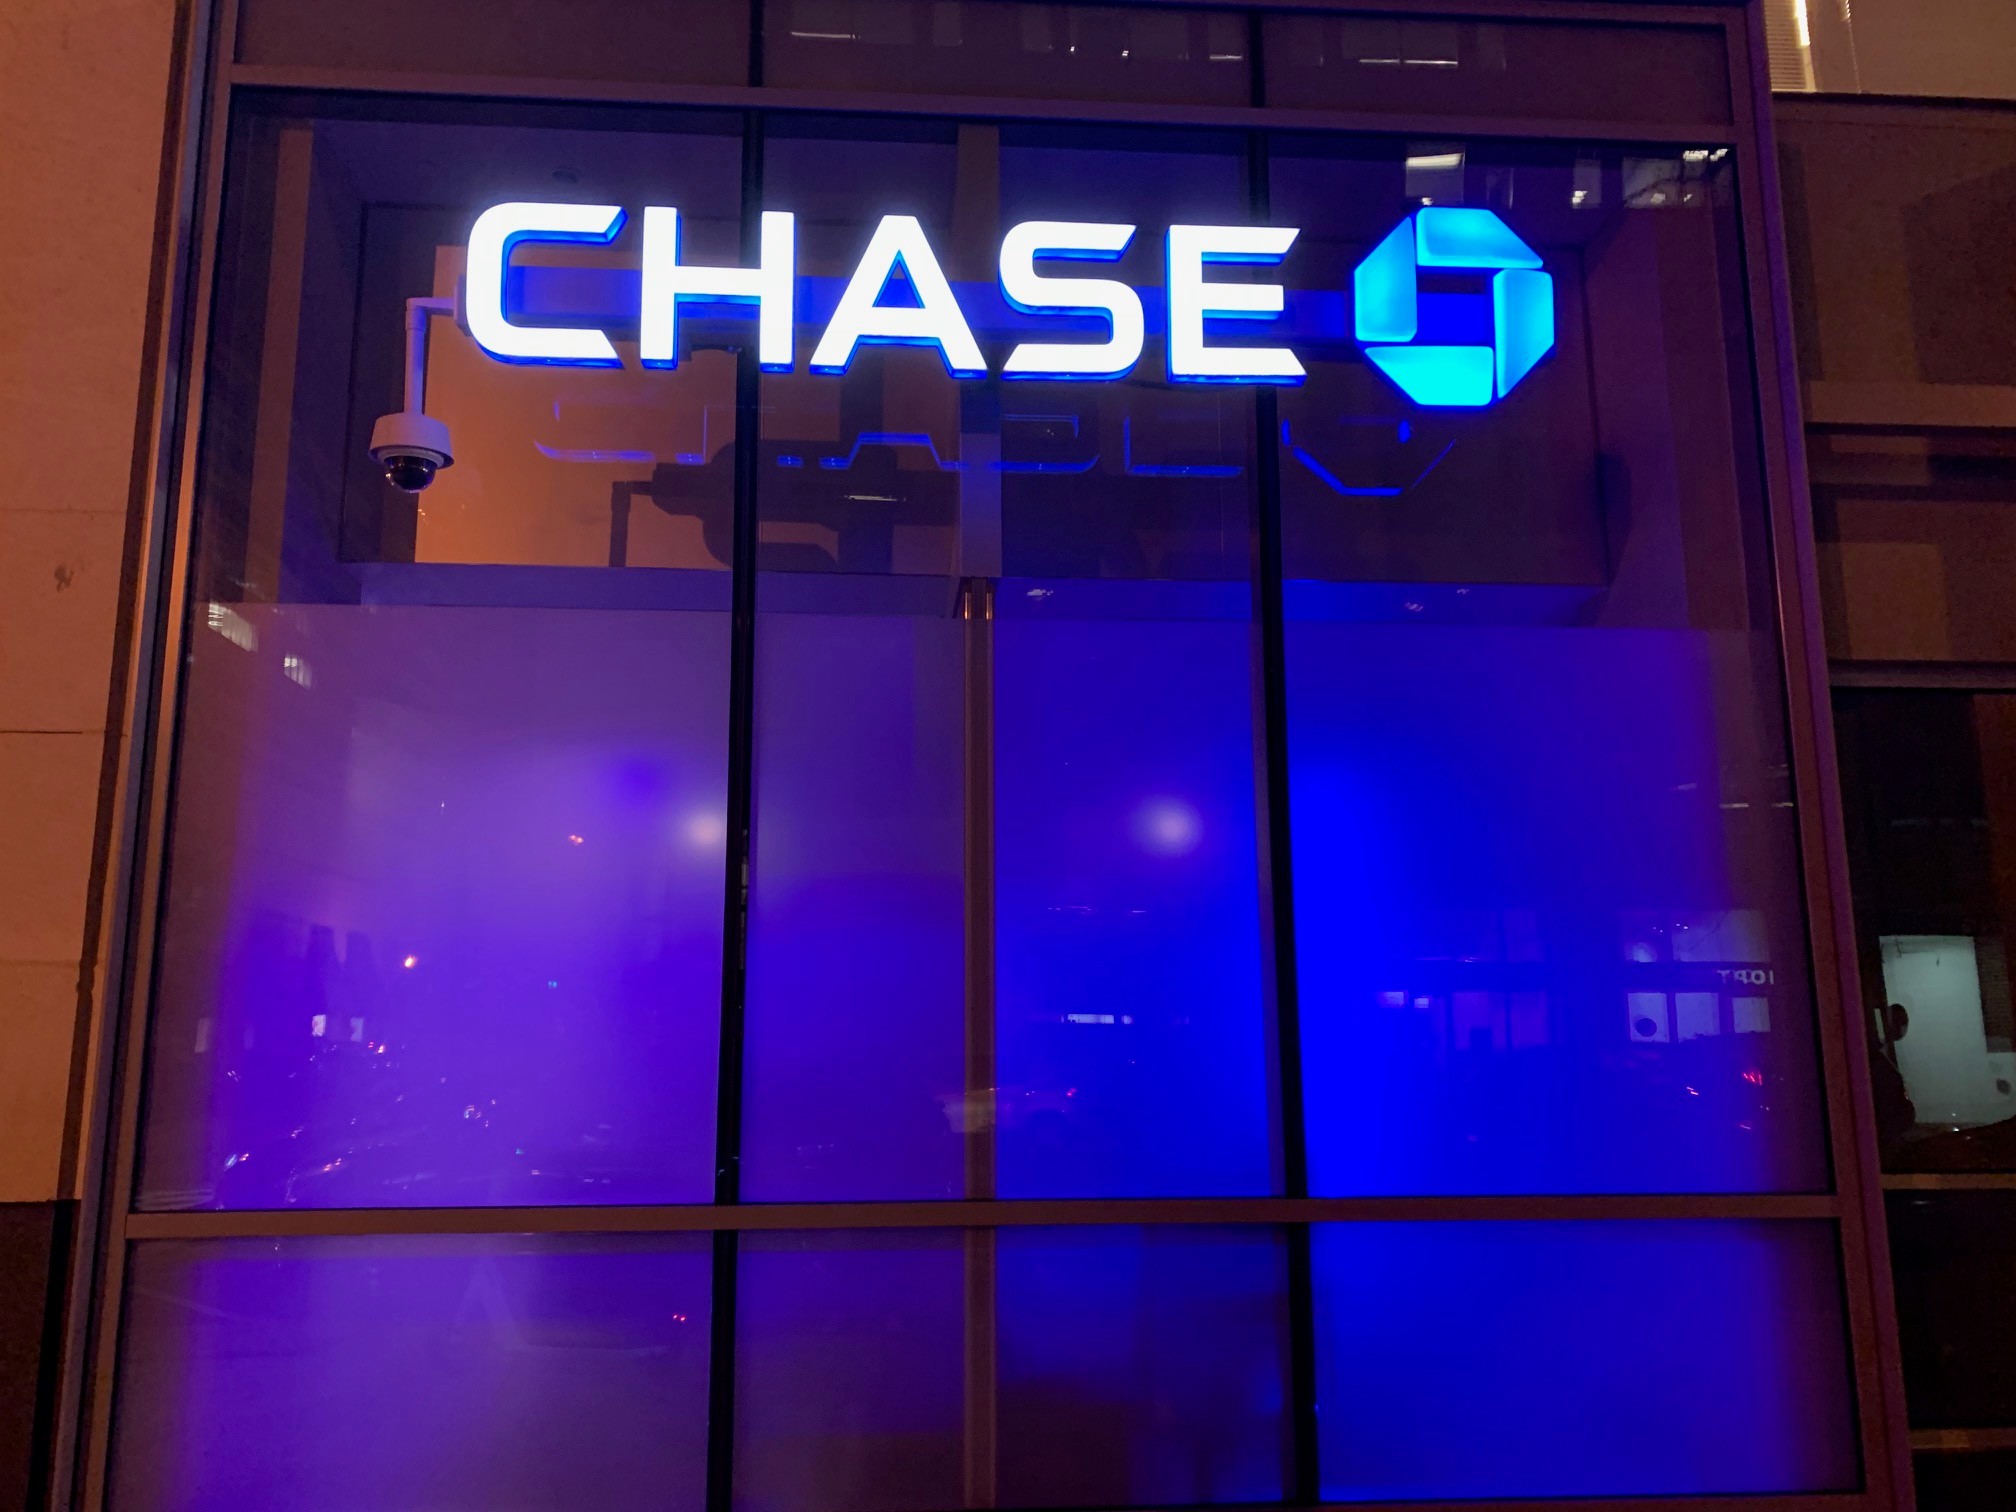 $900 deals for Chase Ink cards